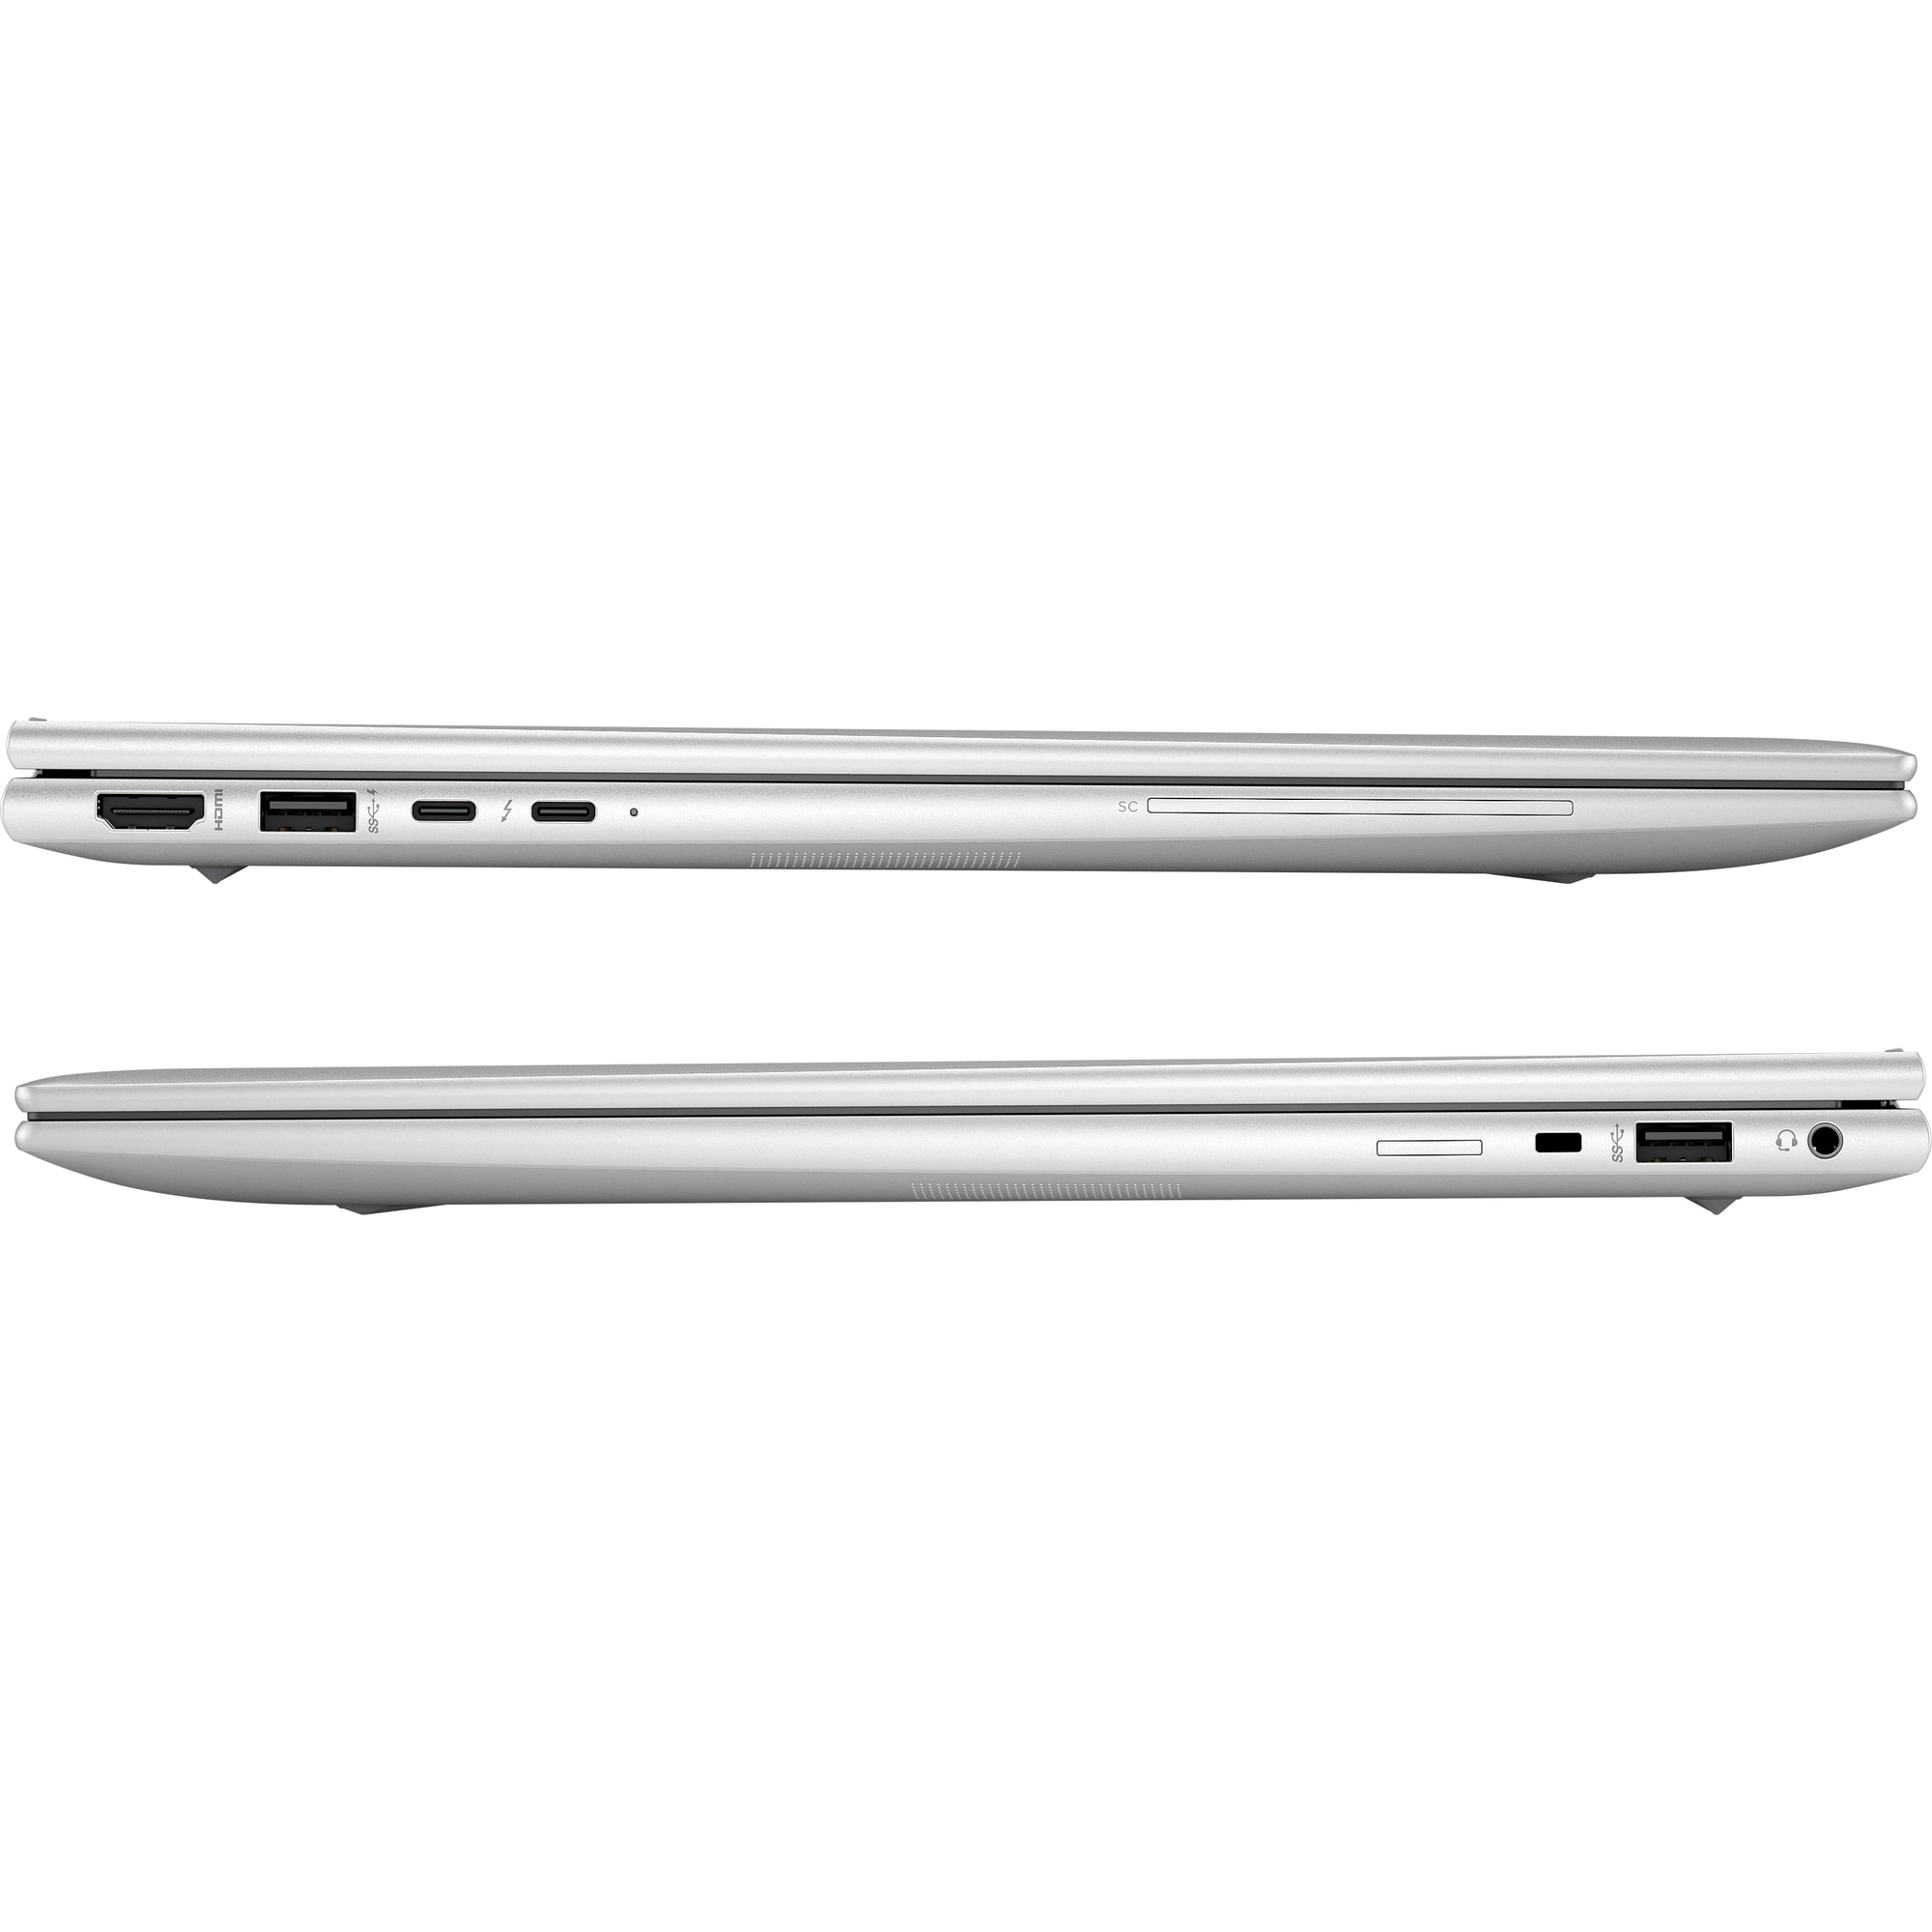 HP NTB EliteBook 860 G10 i5-1340P 16WUXGA 400 IR,  2x8GB,  512GB,  ax,  BT,  FpS,  bckl kbd,  76WHr,  Win11Pro,  3y onsite4 